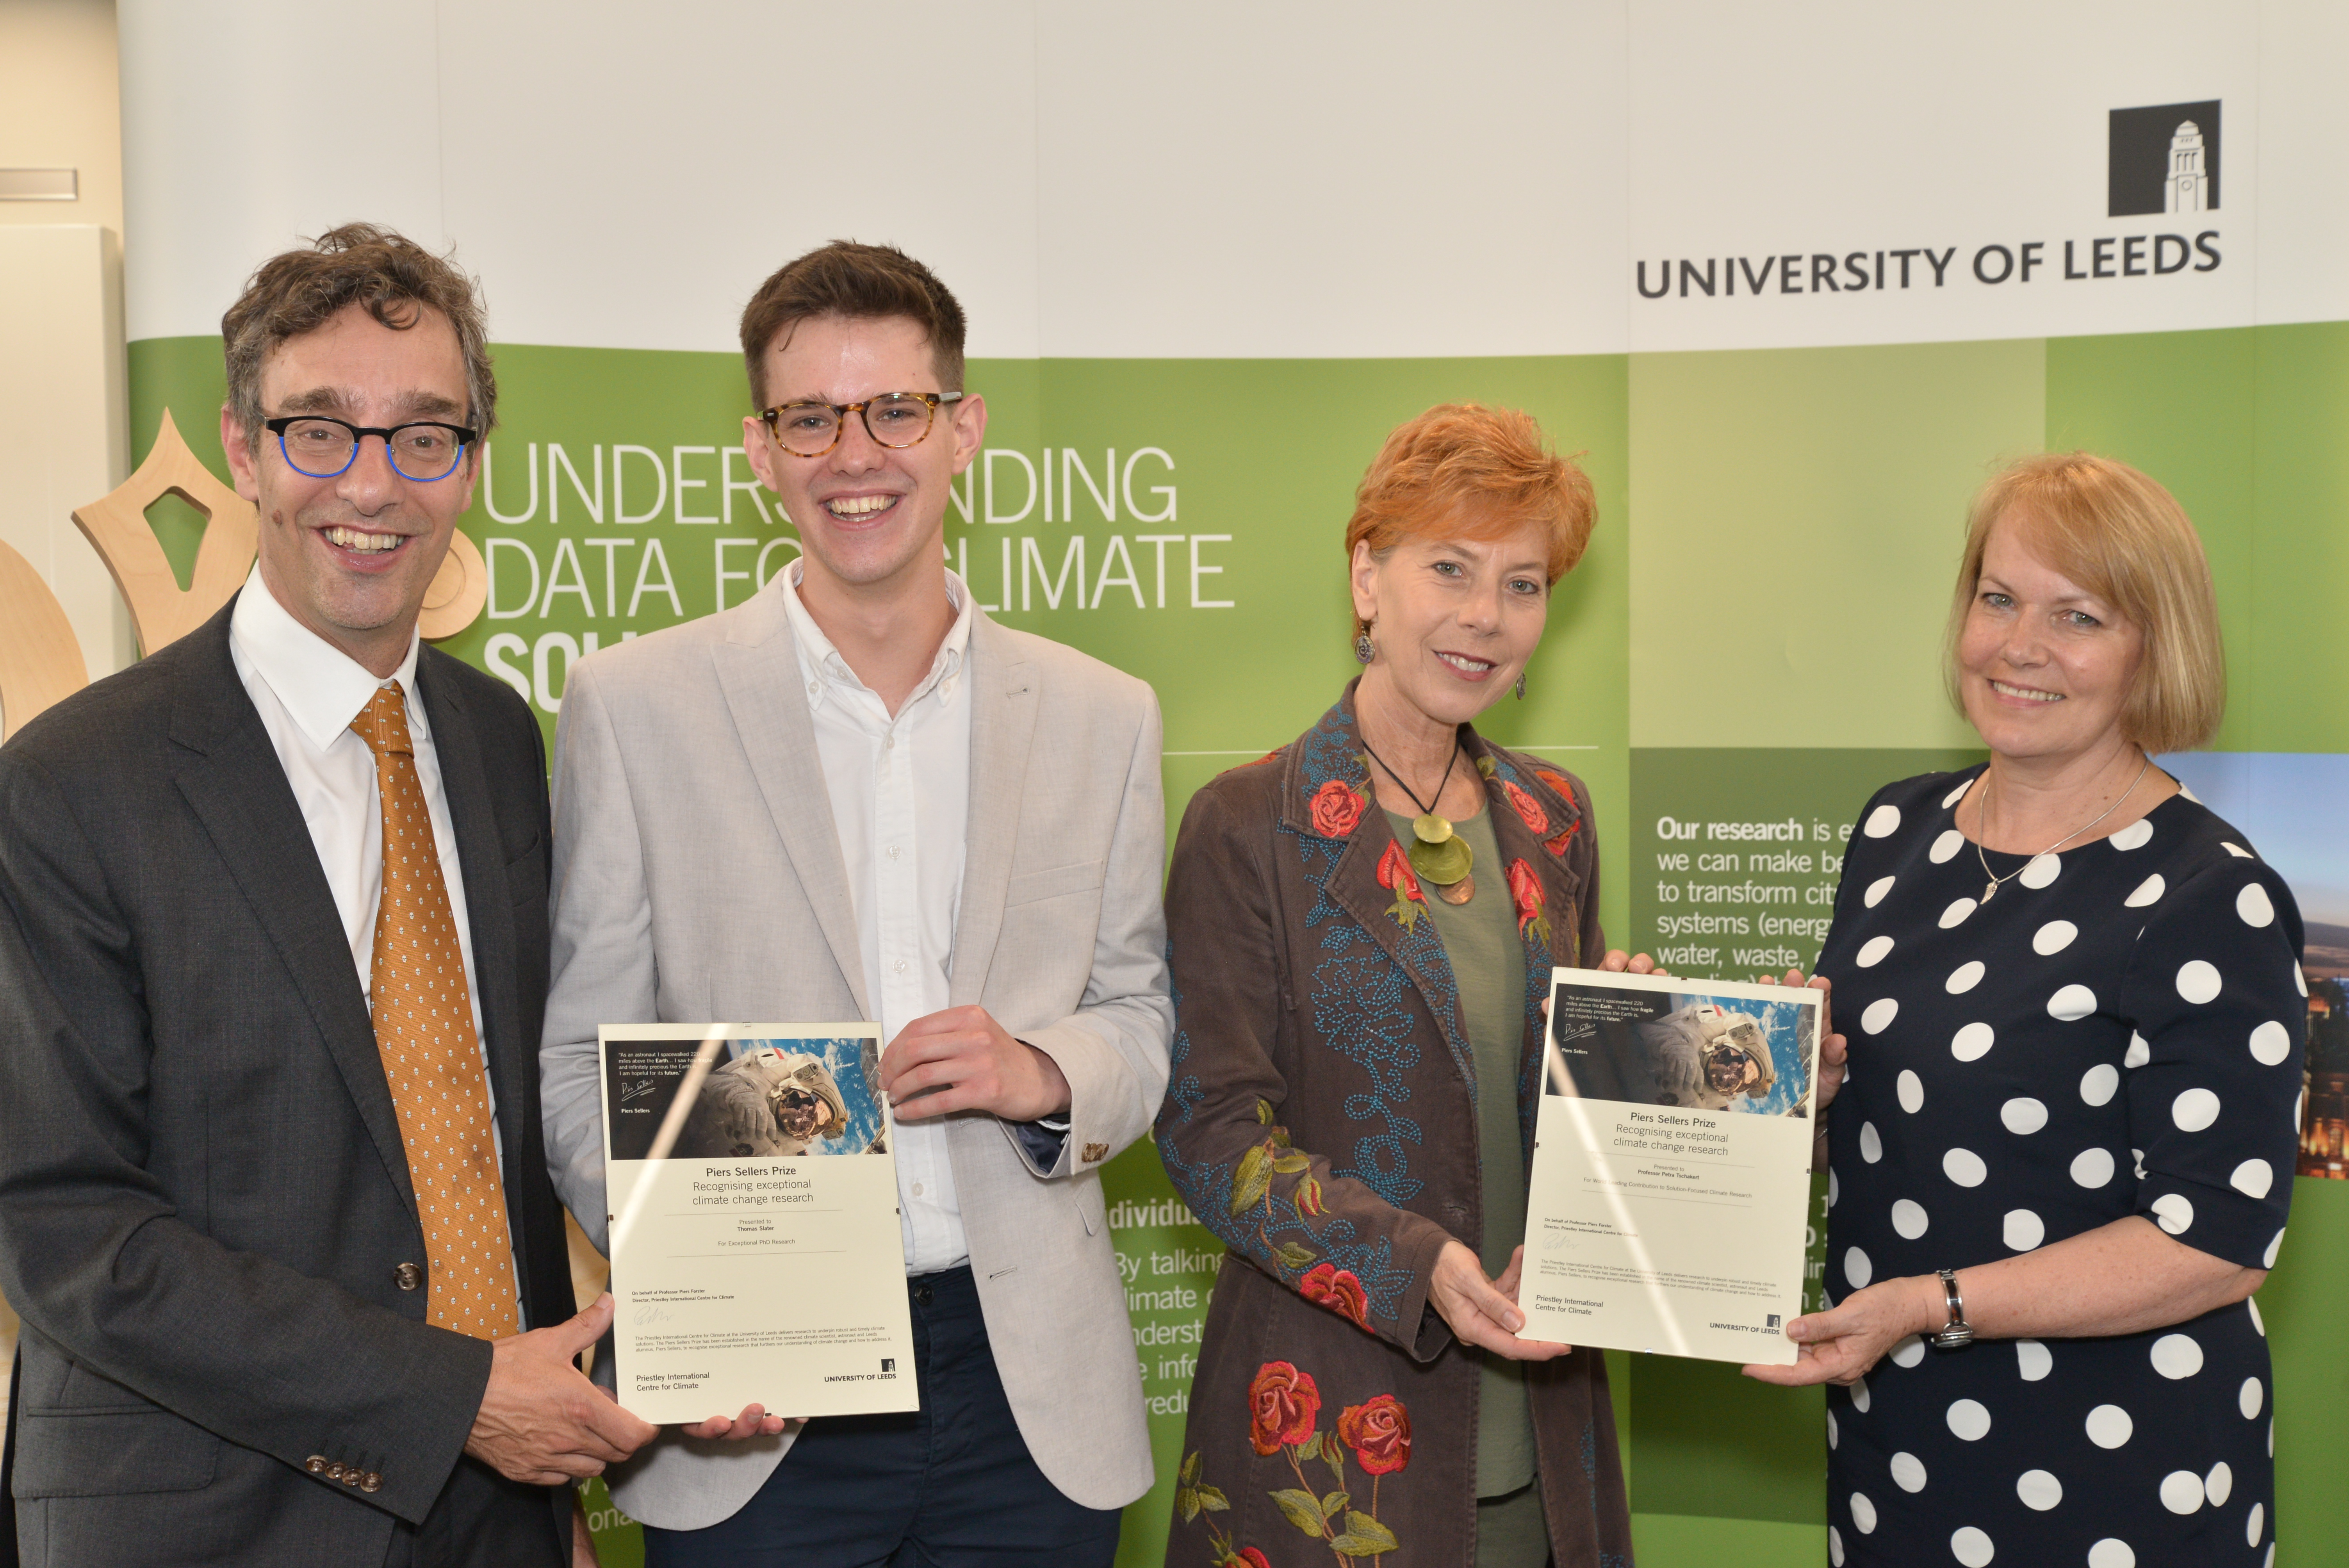 Image: Piers Sellers Prize-giving. Left to right: Director of the Priestley International centre for Climate, Professor Piers Forster; prize winner, Tom Slater; prize winner, Professor Petra Tschakert; University of Leeds Chancellor, Dame Professor Jane Francis. (Credit: Simon Miles)